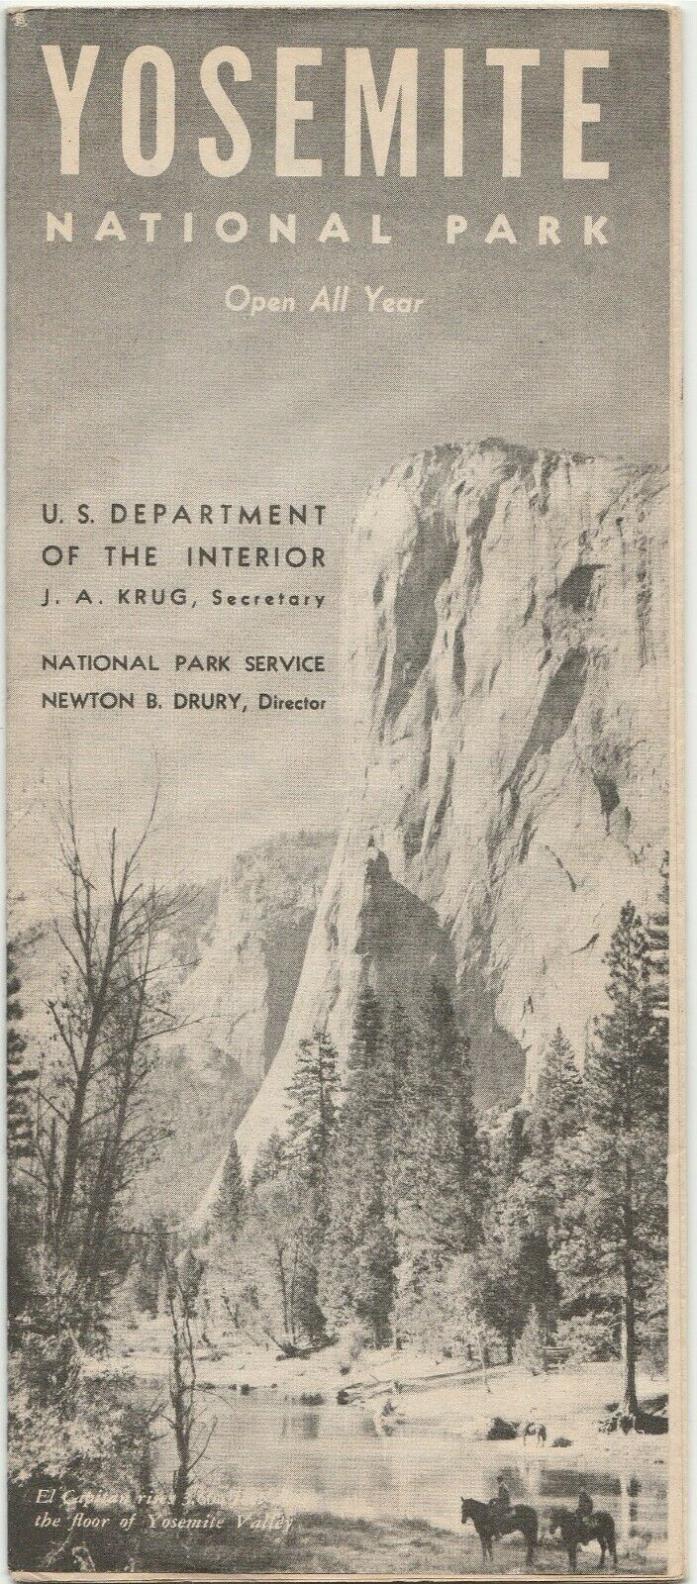 Yosemite National Park Brochure issued By the U.S. Dept. of Interior 1946